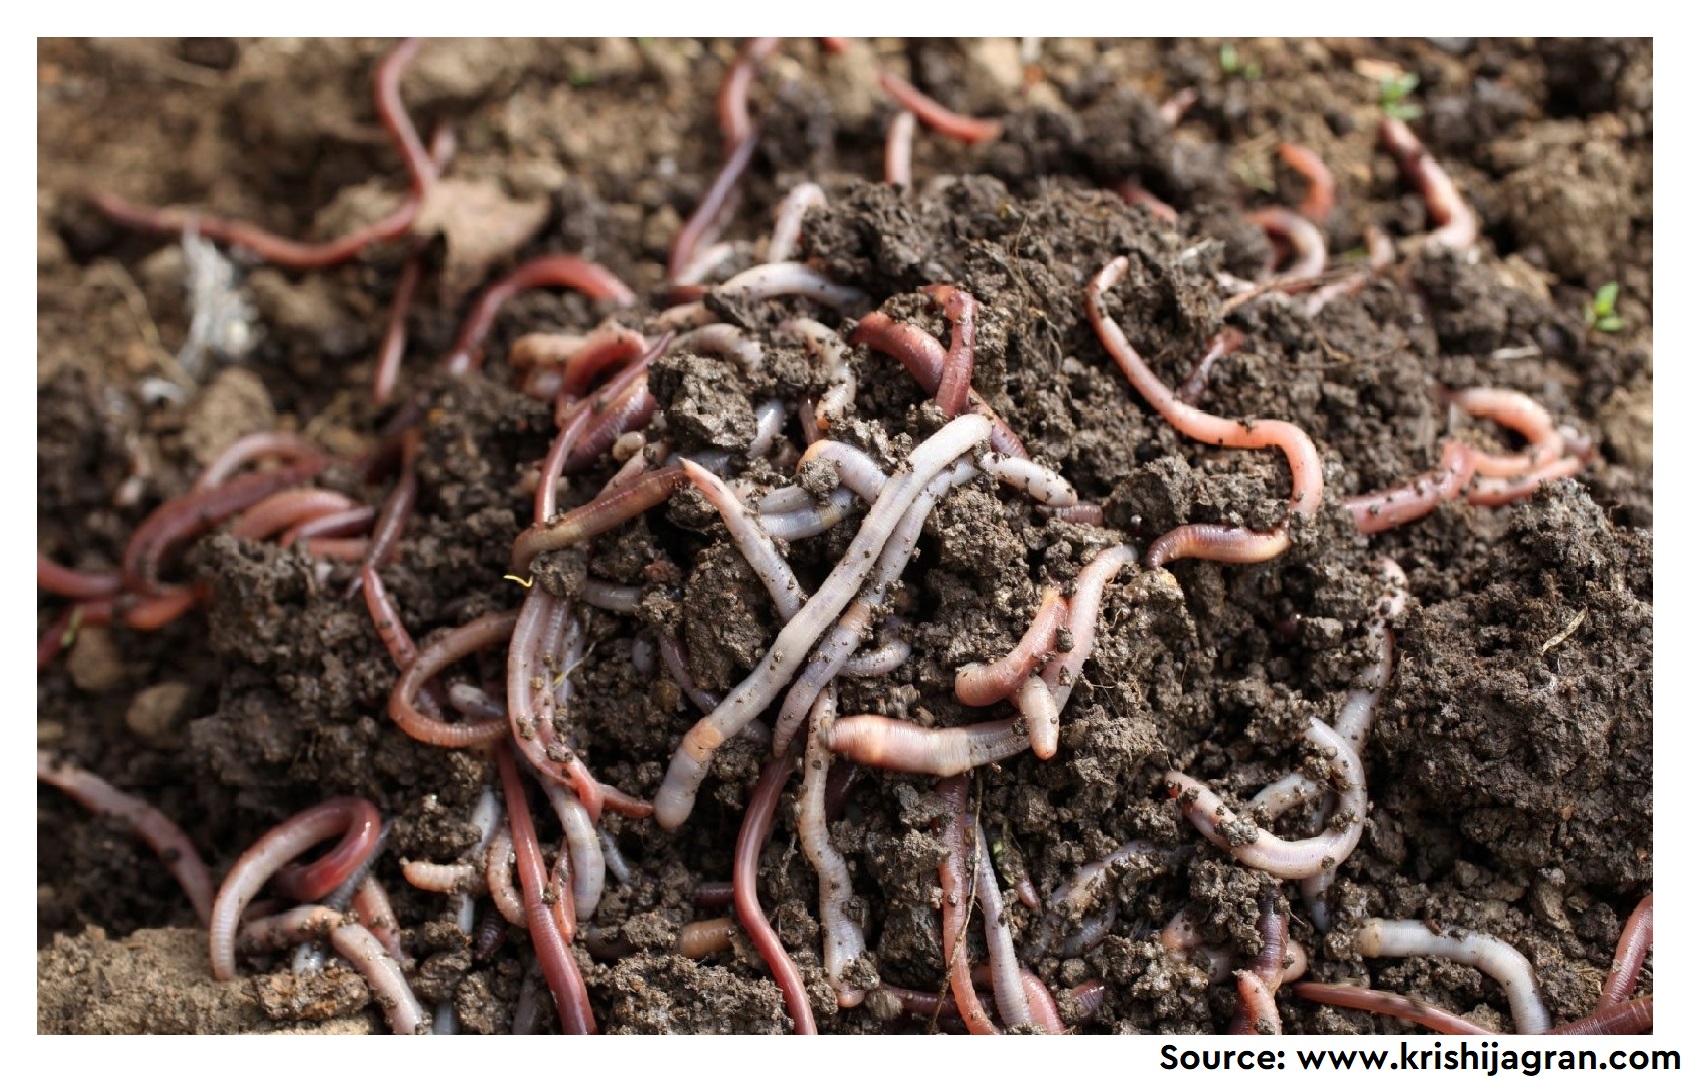 Deciphering potential roles of earthworms in mitigation of antibiotic resistance in the soils from diverse ecosystems